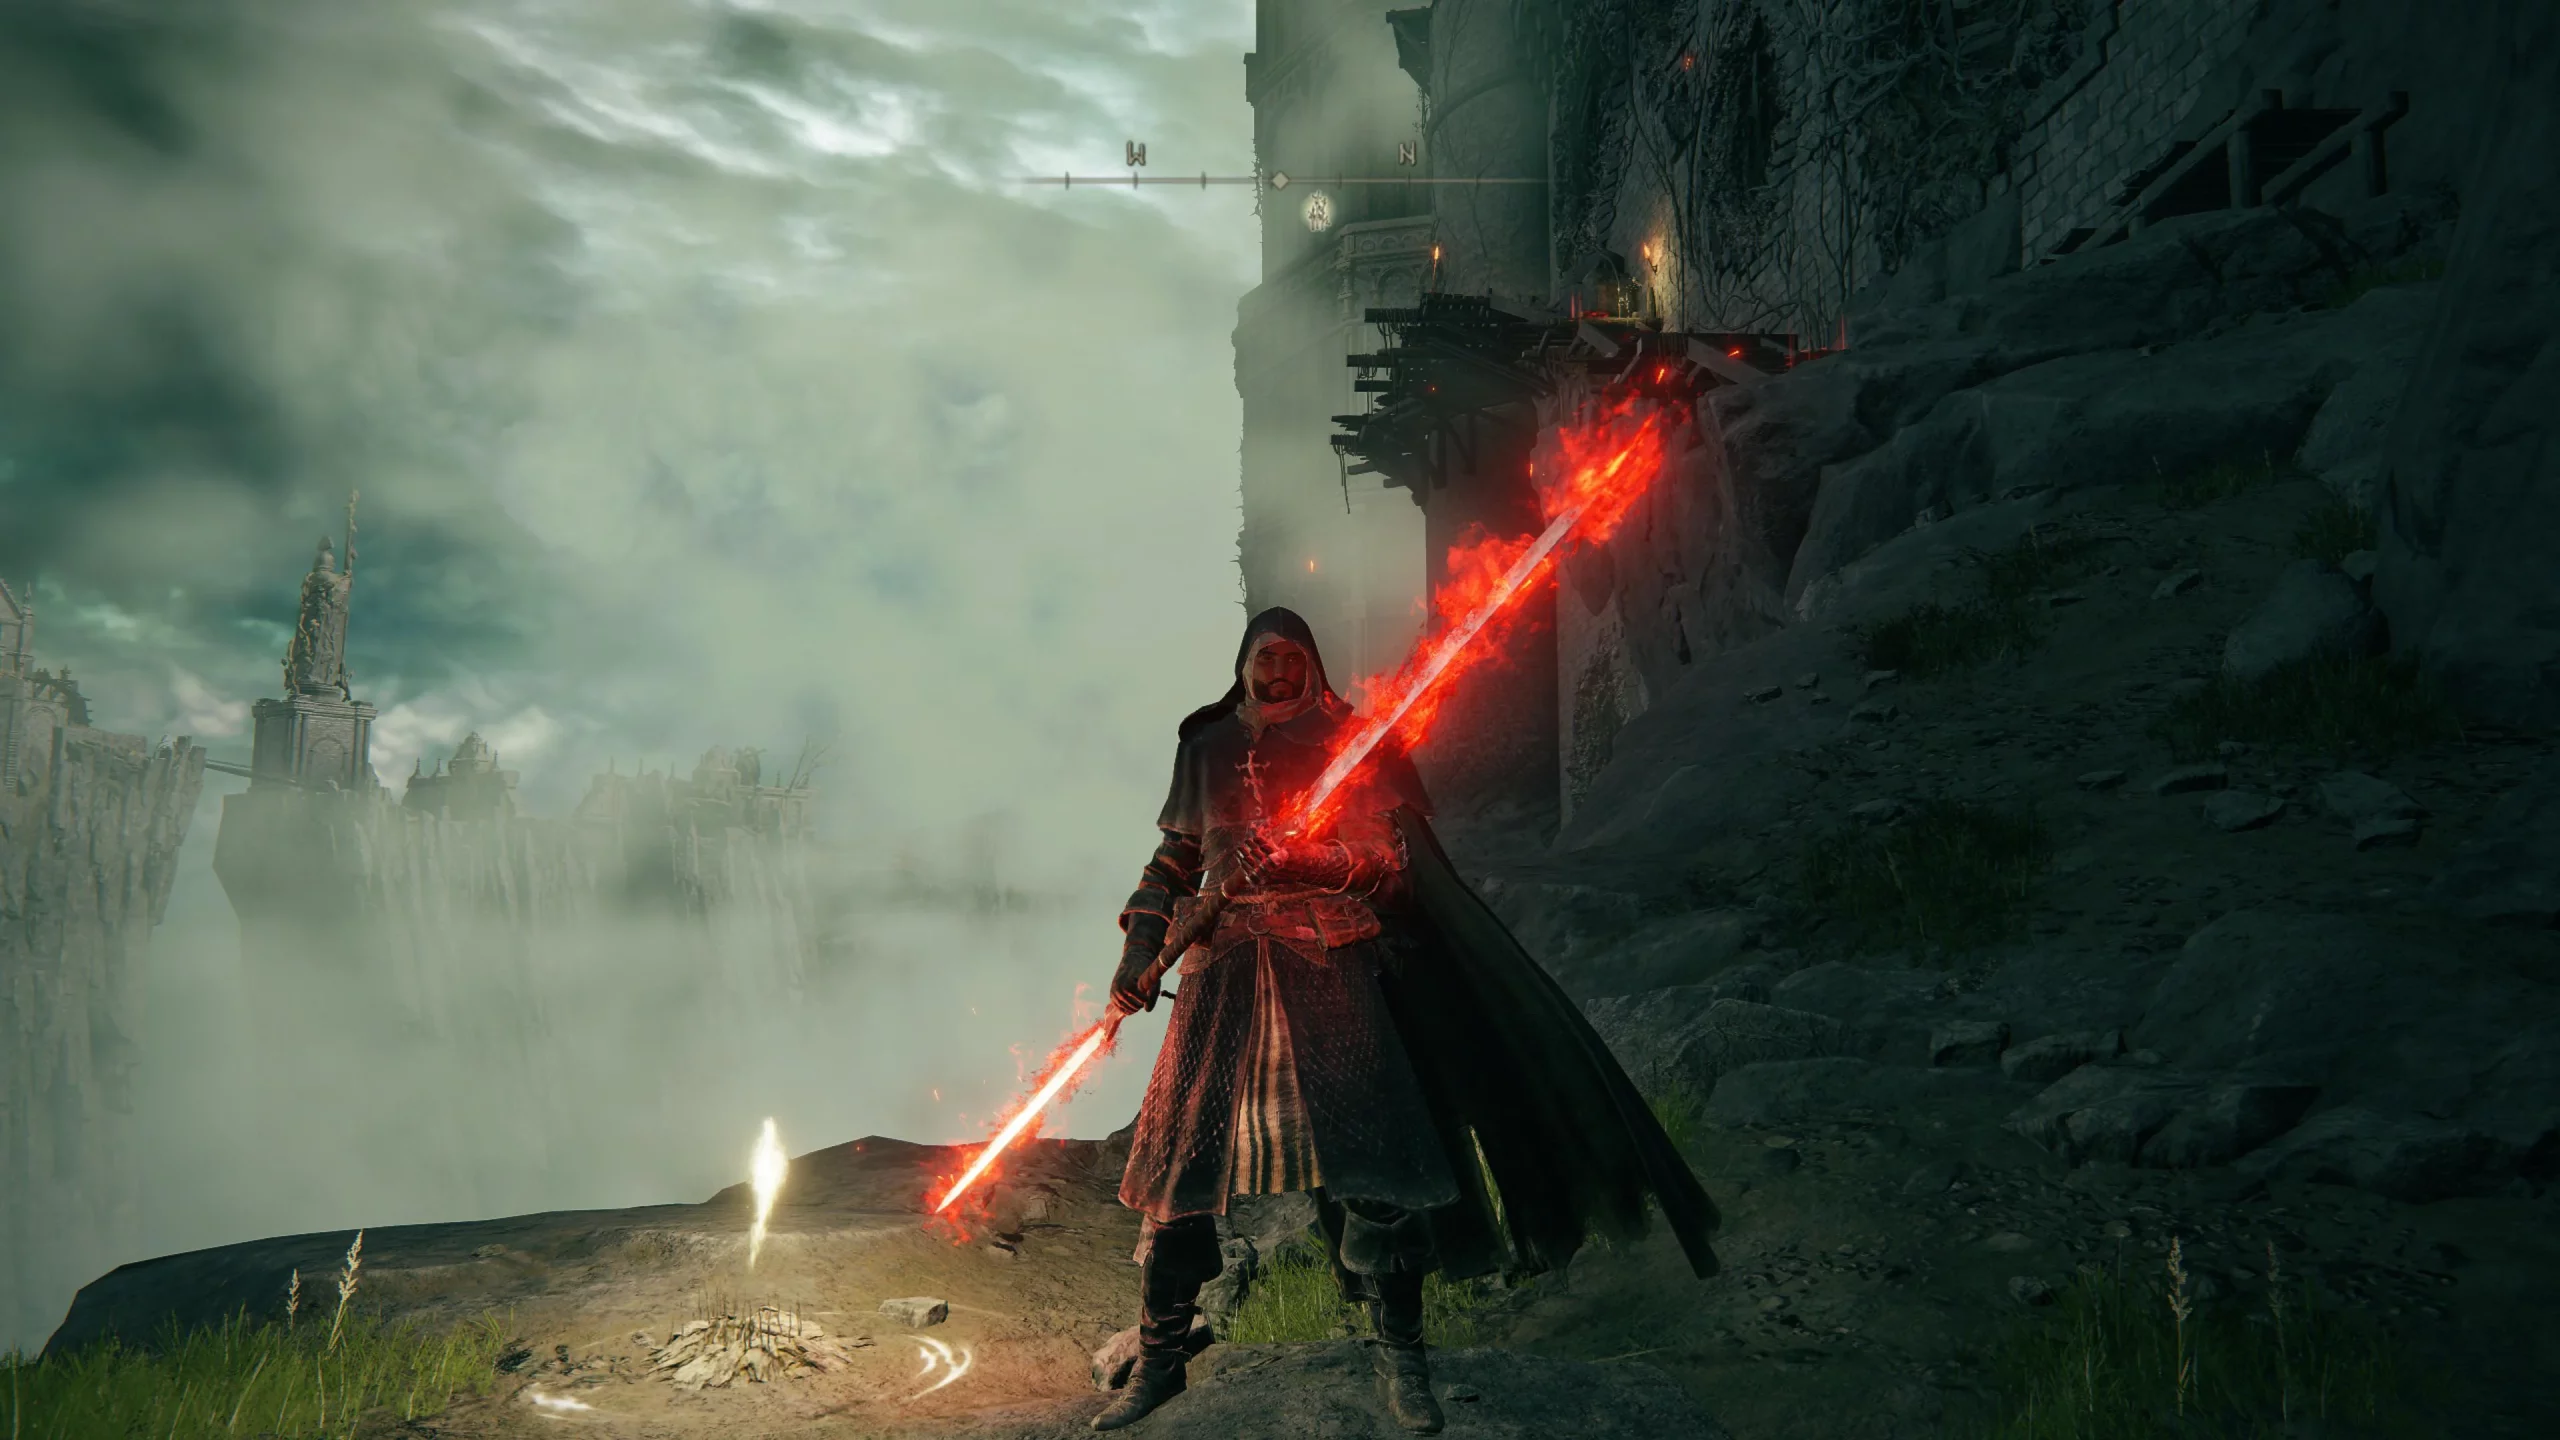 The Bloodflame Blade